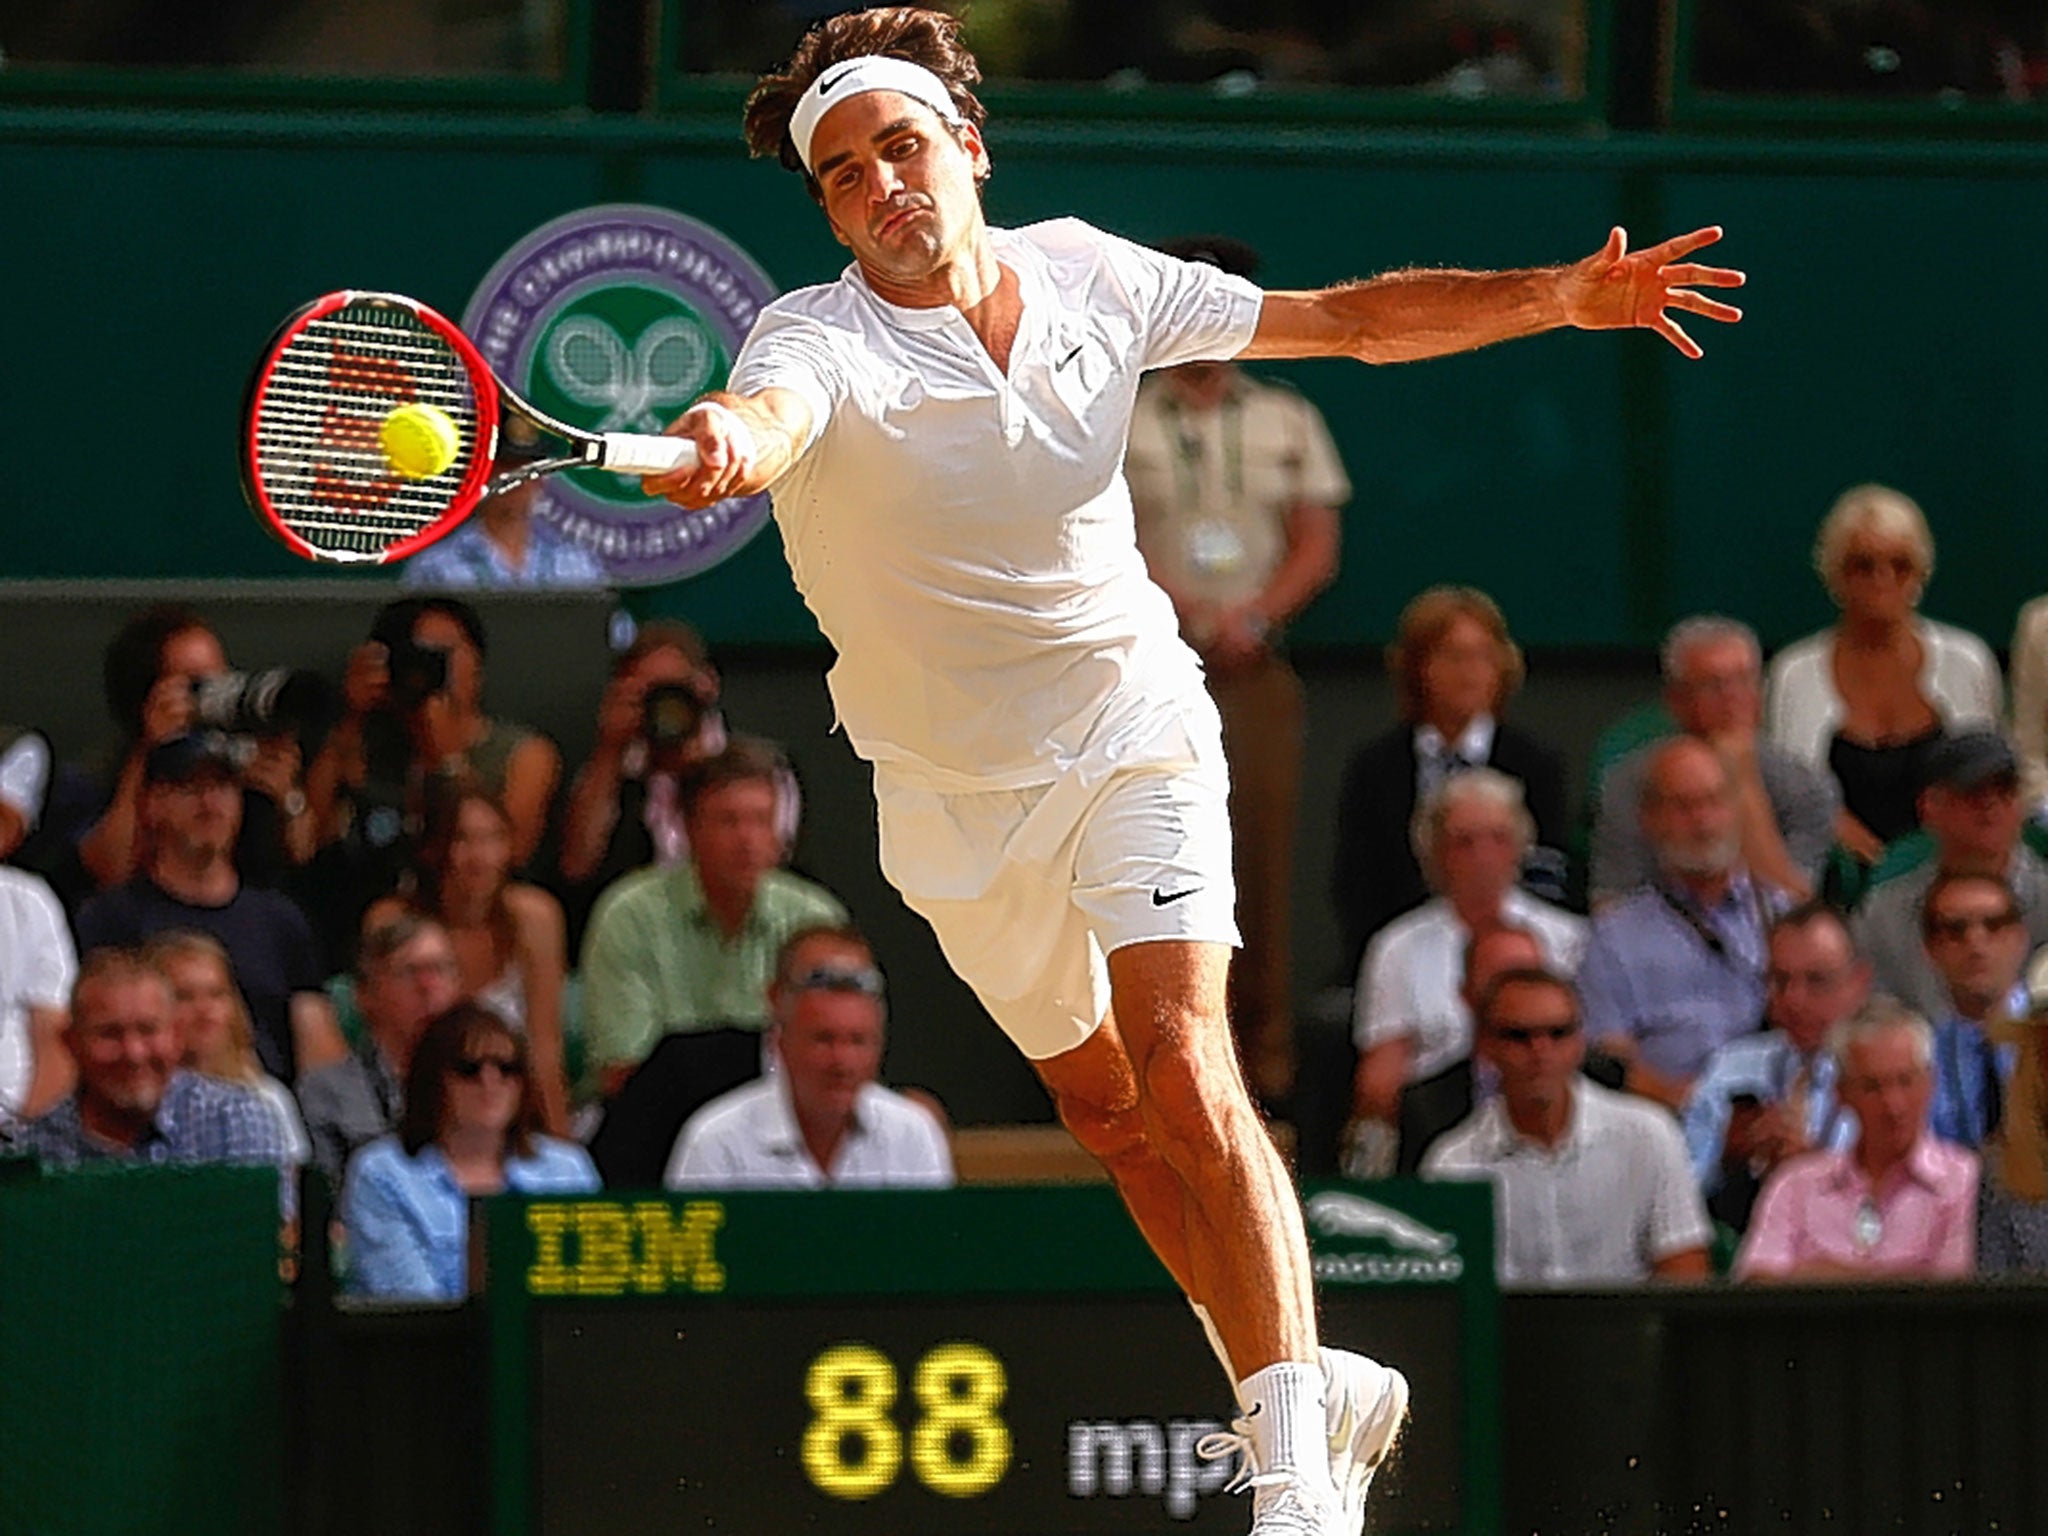 Roger Federer will be playing in his 26th Grand Slam final and 10th at Wimbledon